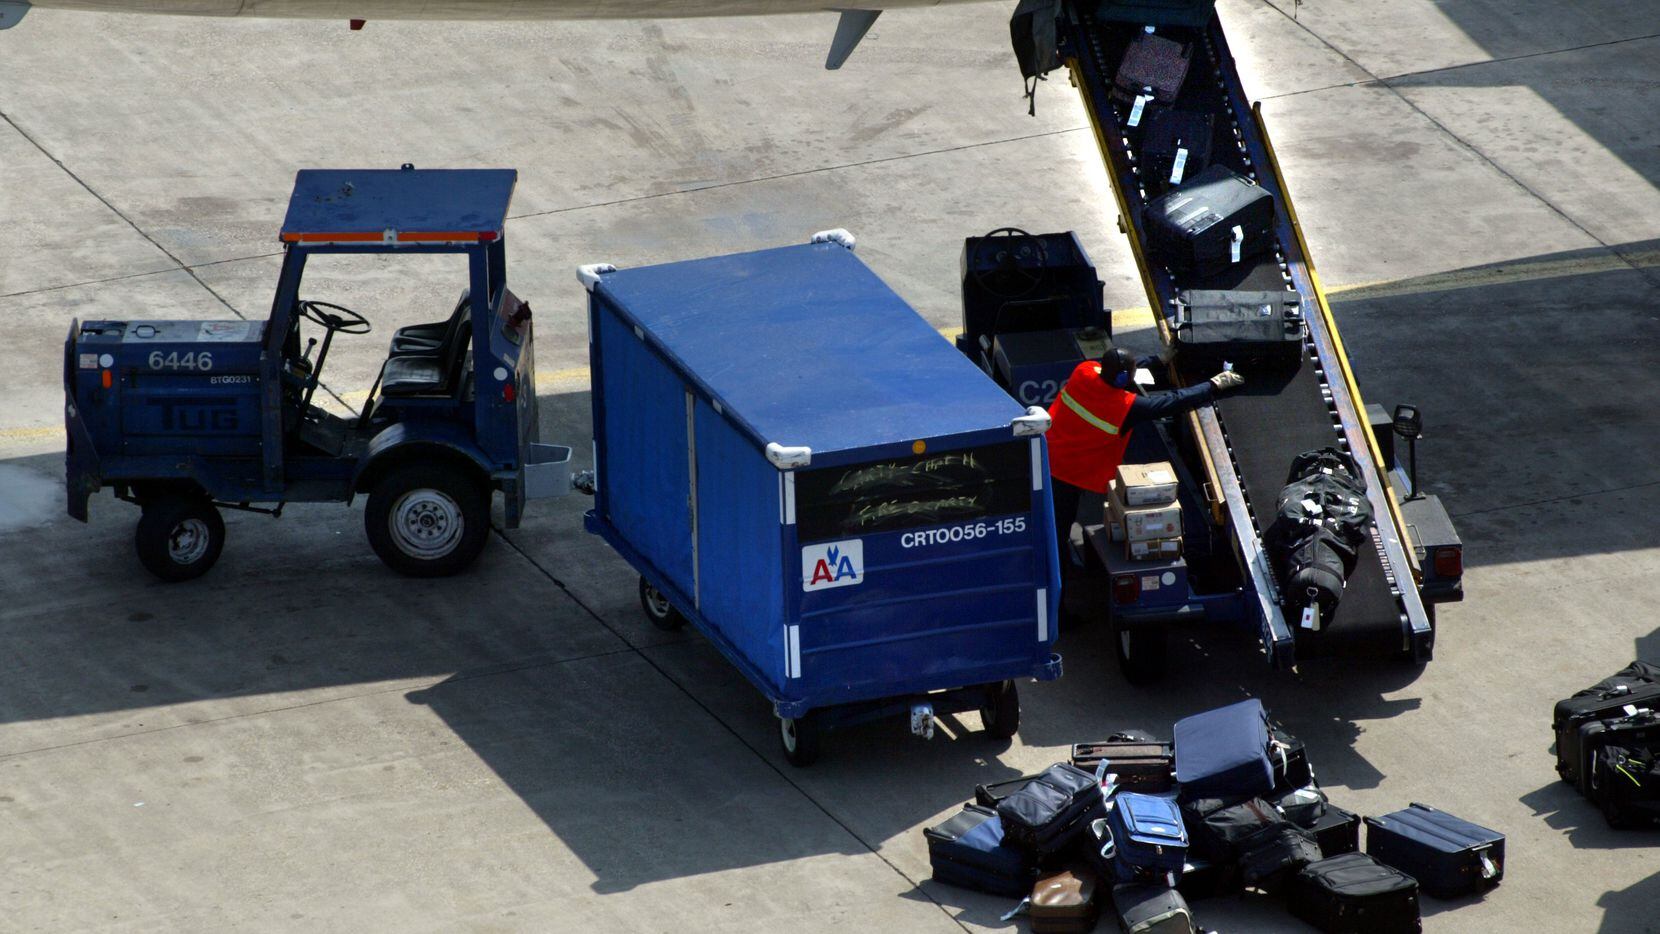 ORG XMIT: *S0405533084* Tuesday, March 11, 2003   #44340A baggage handler unloads luggage...